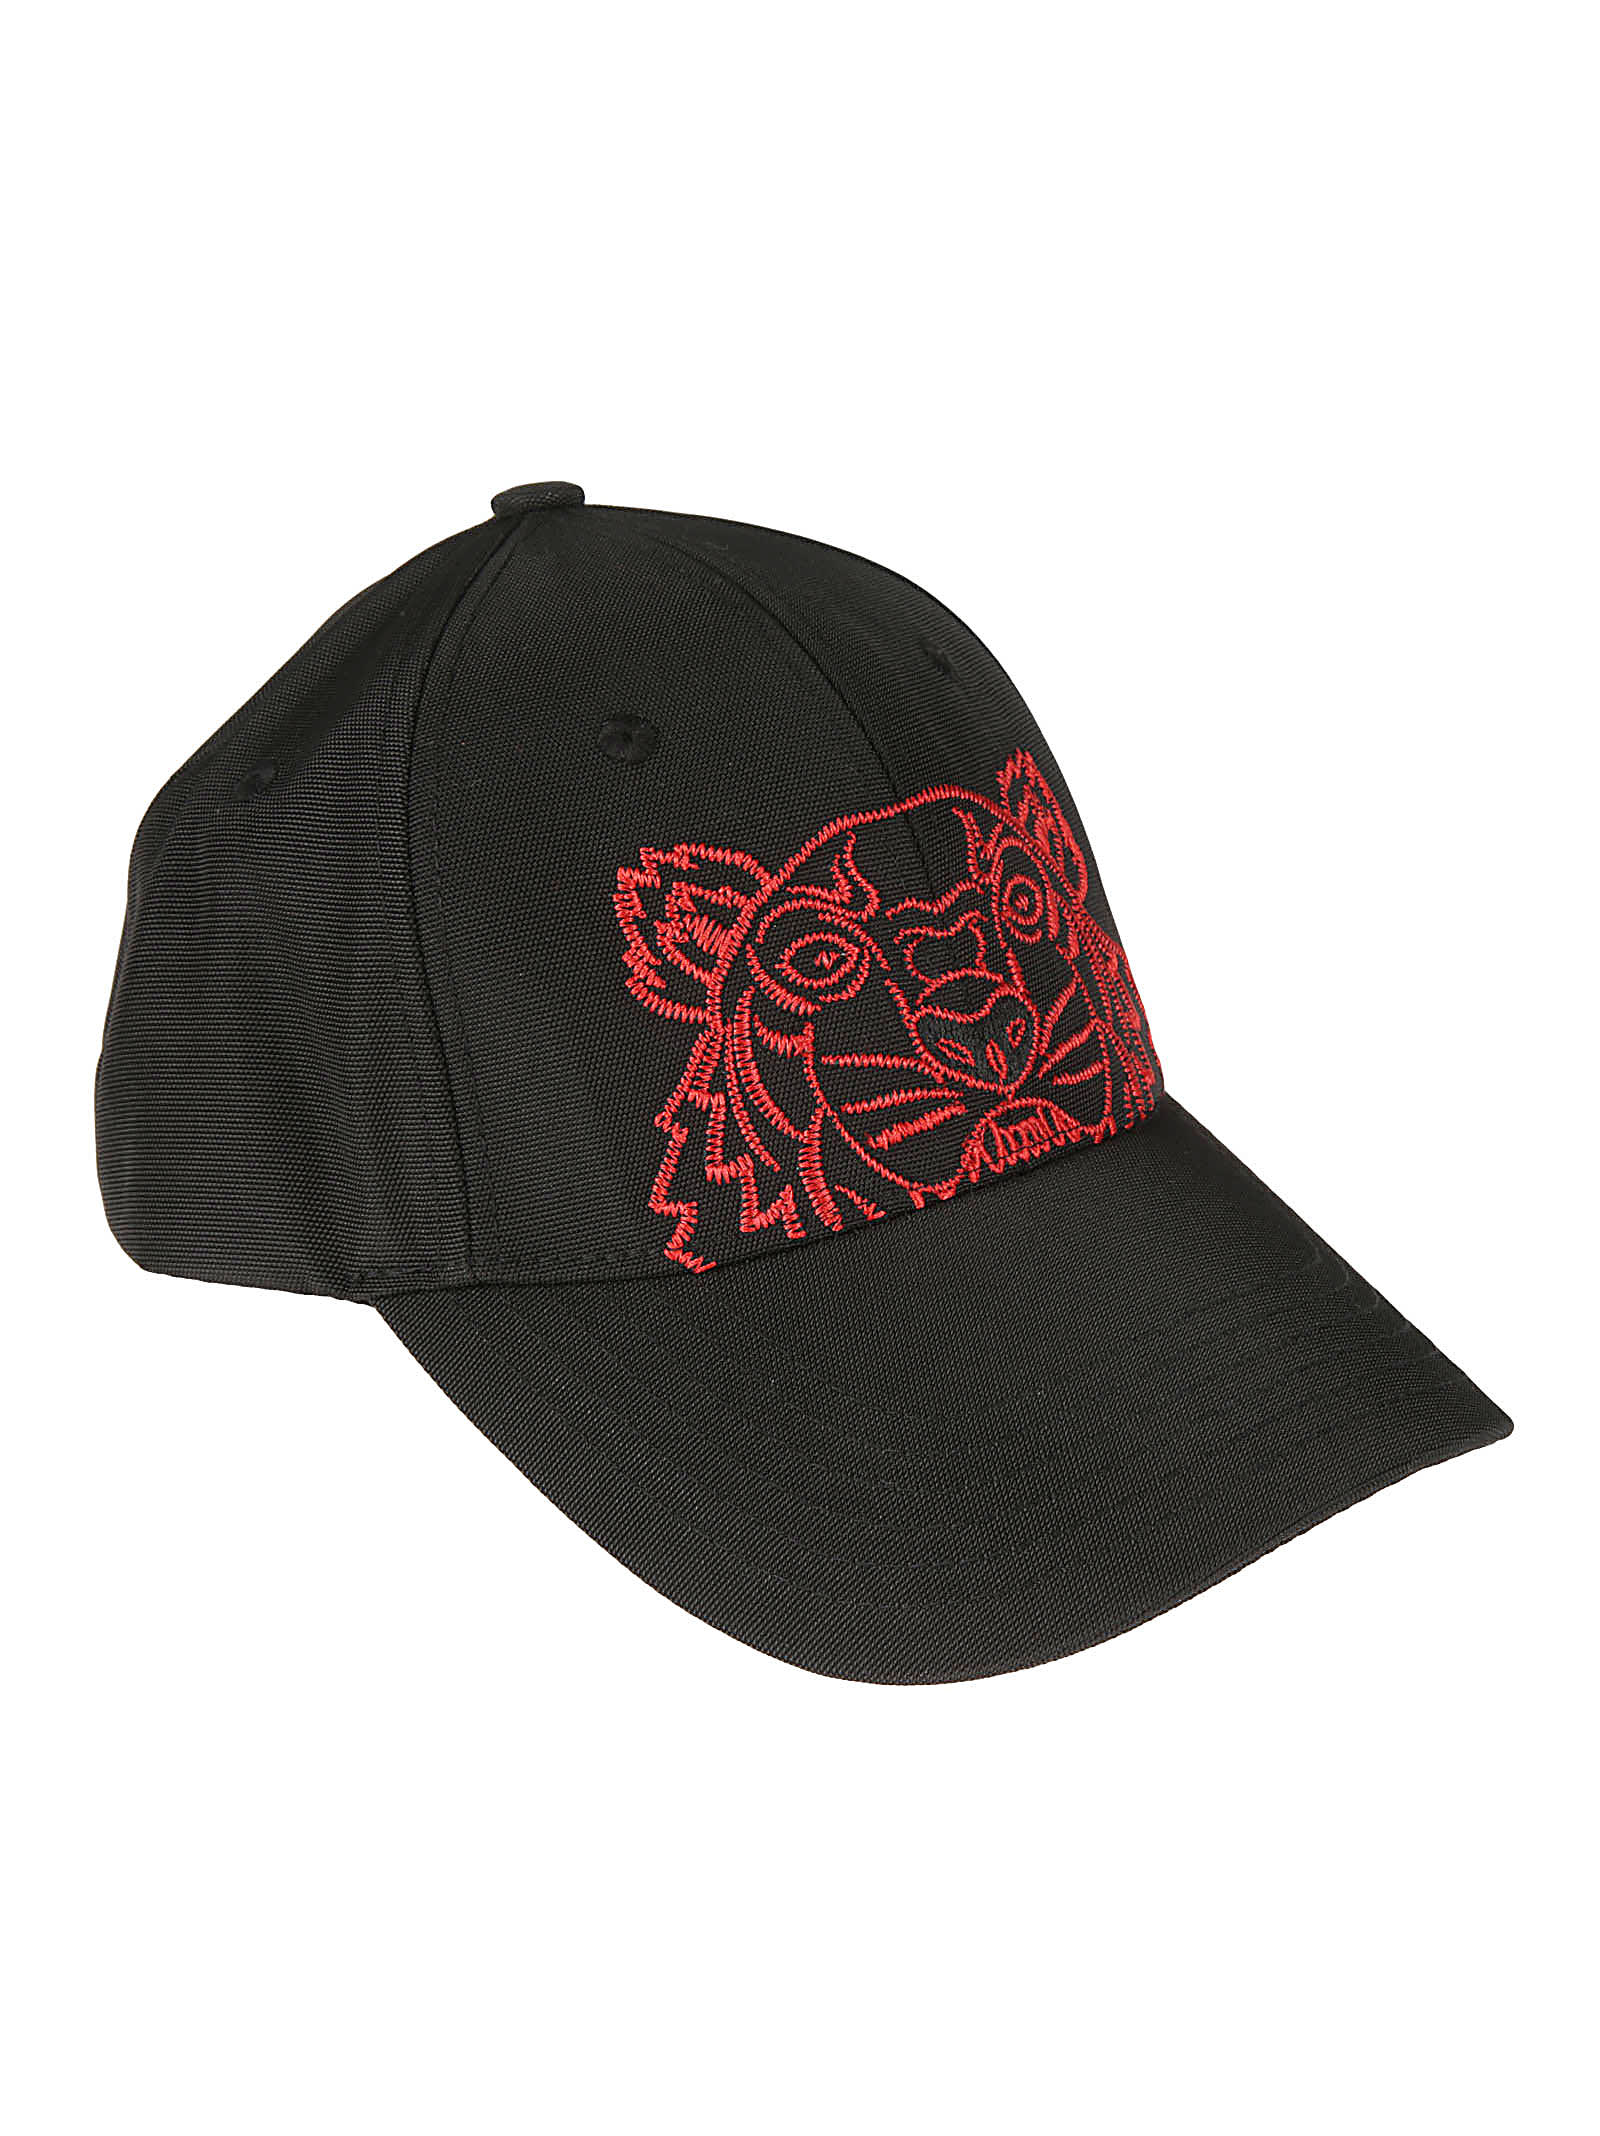 Kenzo Tiger Embroidered Cap In Black/red